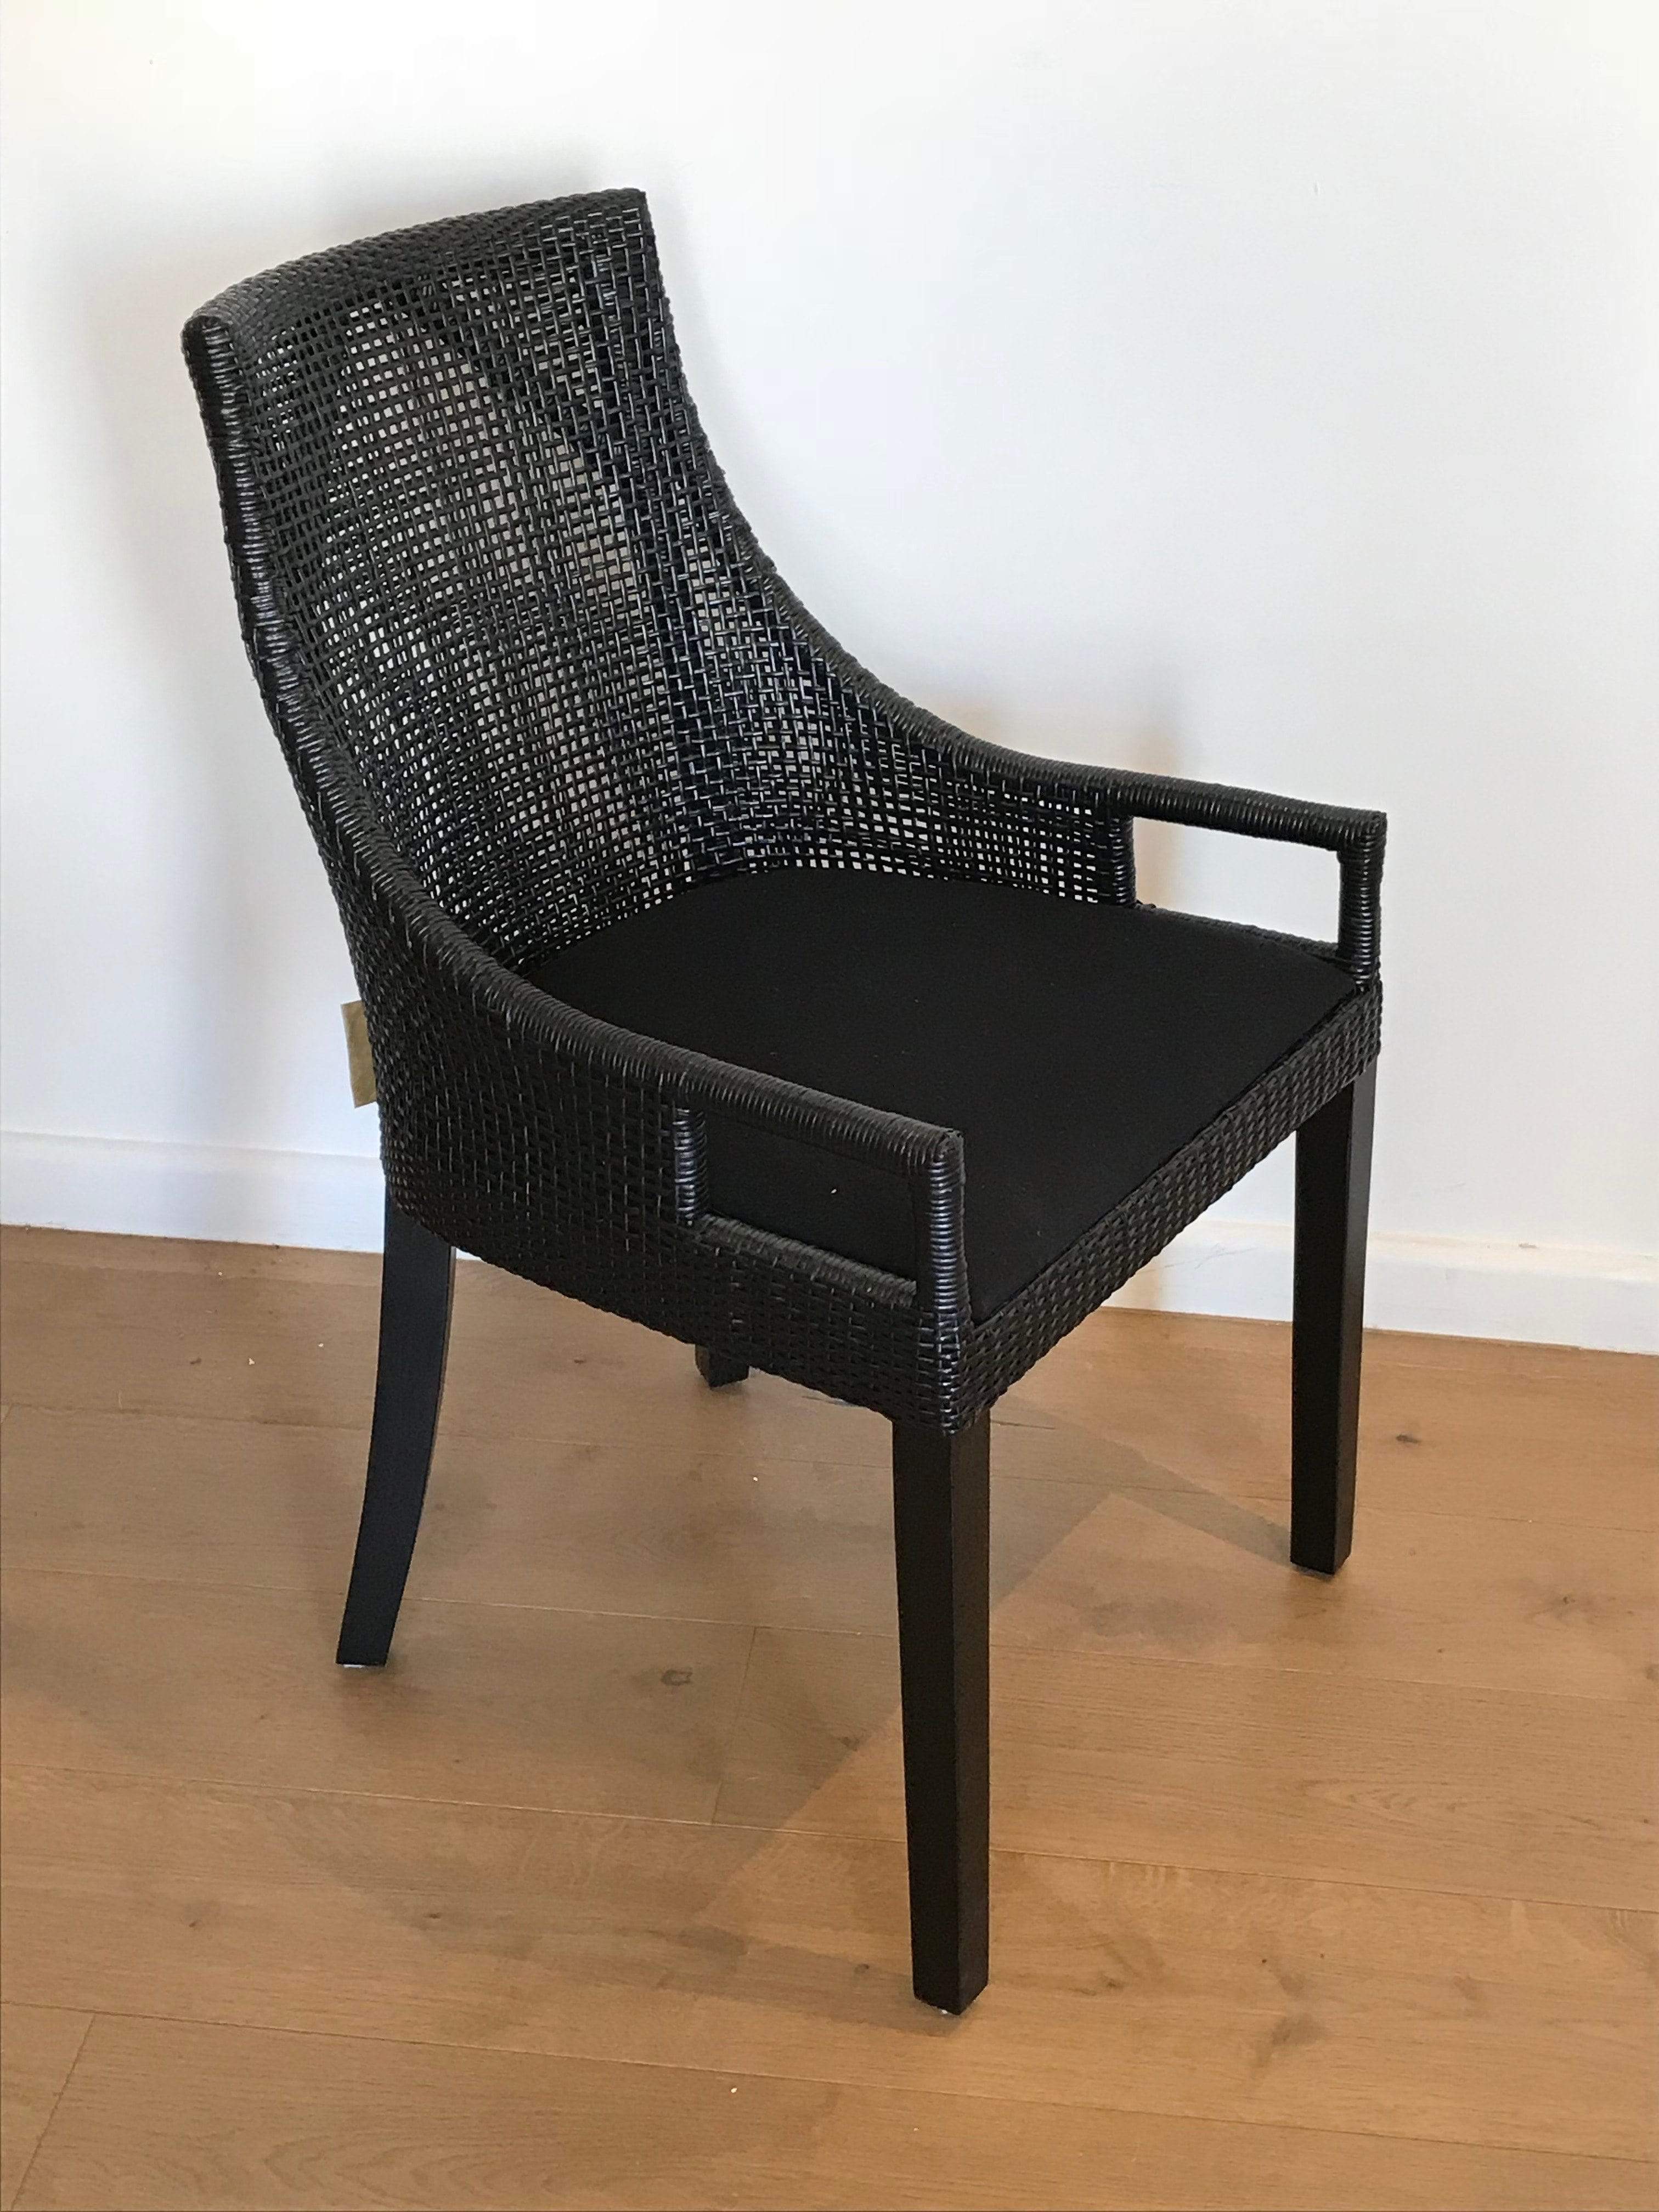 Gaudion Furniture Dining Chairs 1 x Black Avoca Chair Avoca Dining Chairs 3 Colours